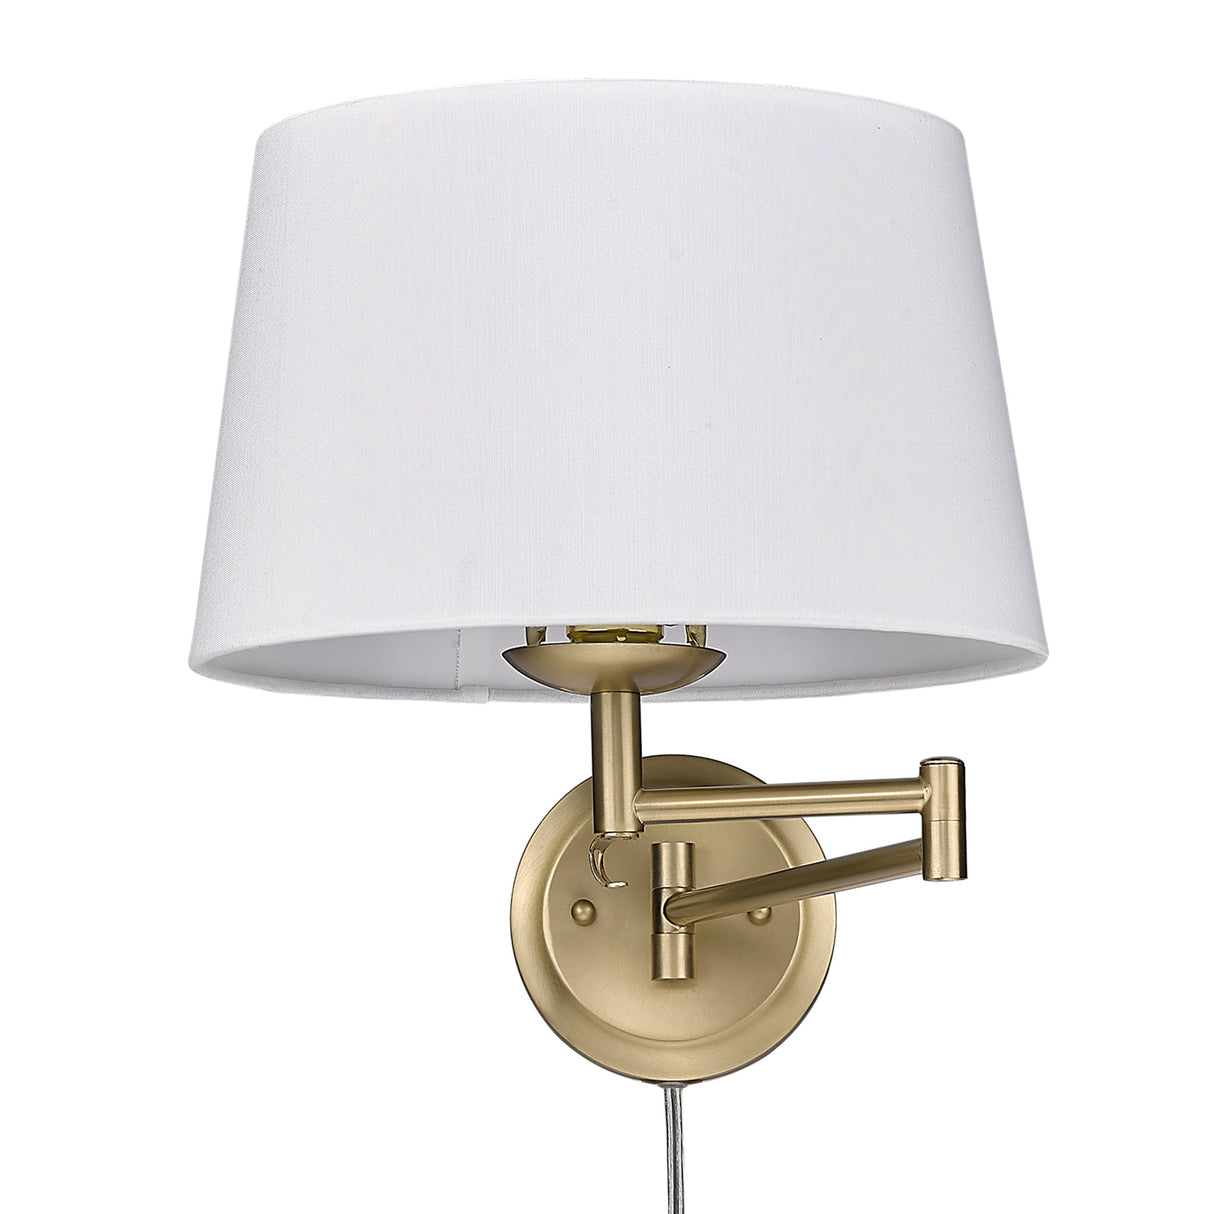 Eleanor Articulating Wall Sconce in Brushed Champagne Bronze with Modern White Shade